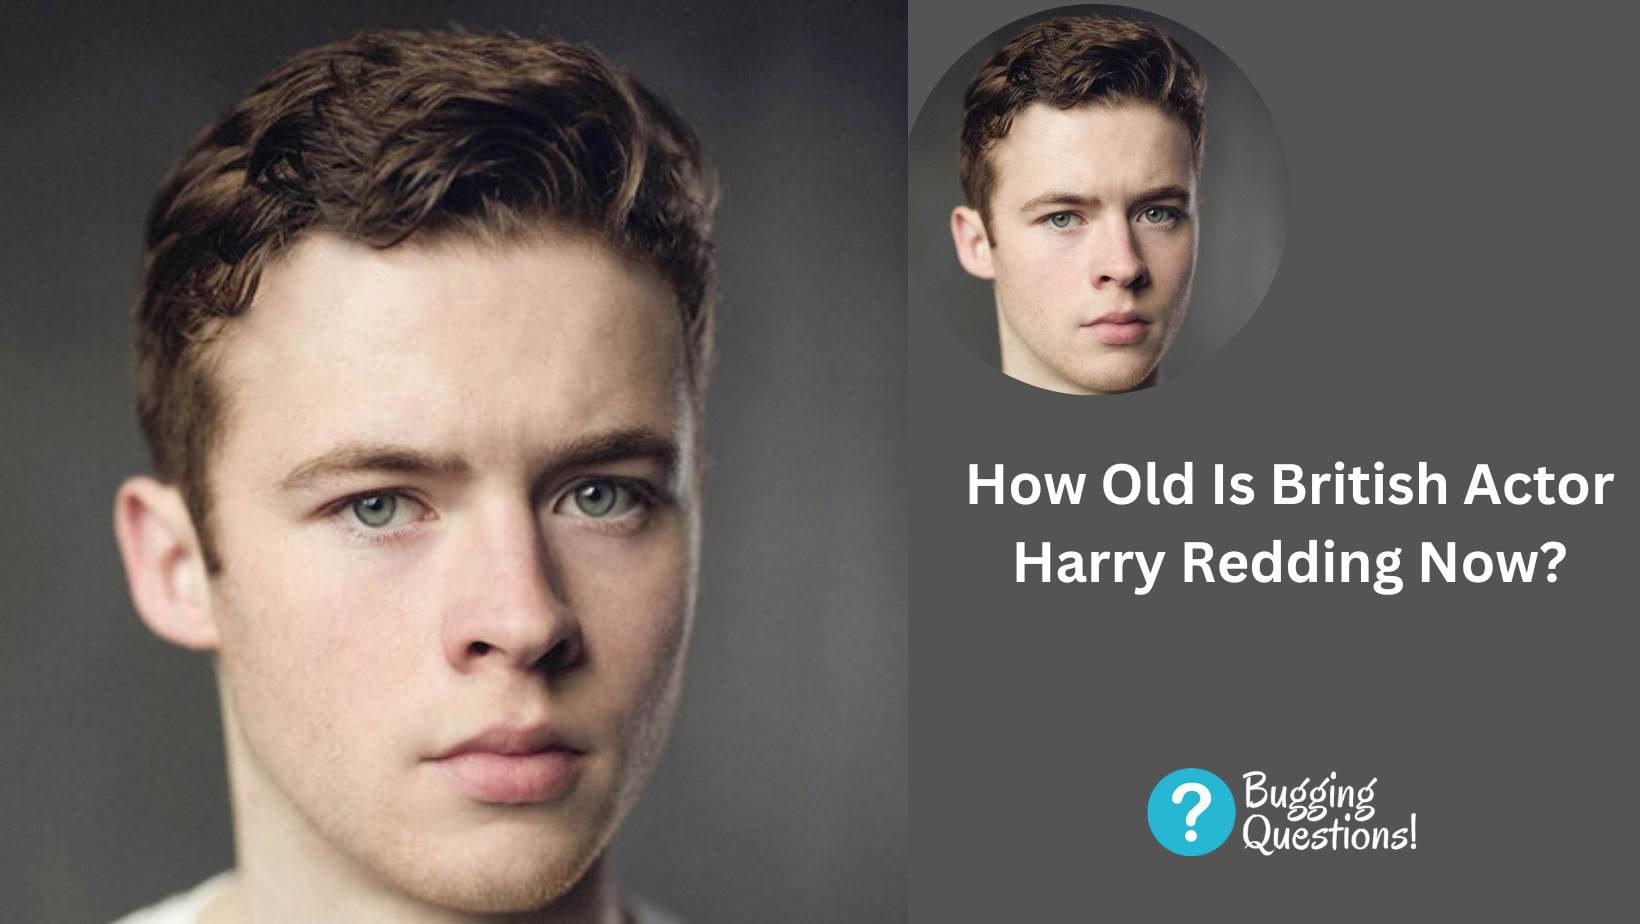 How Old Is British Actor Harry Redding Now?